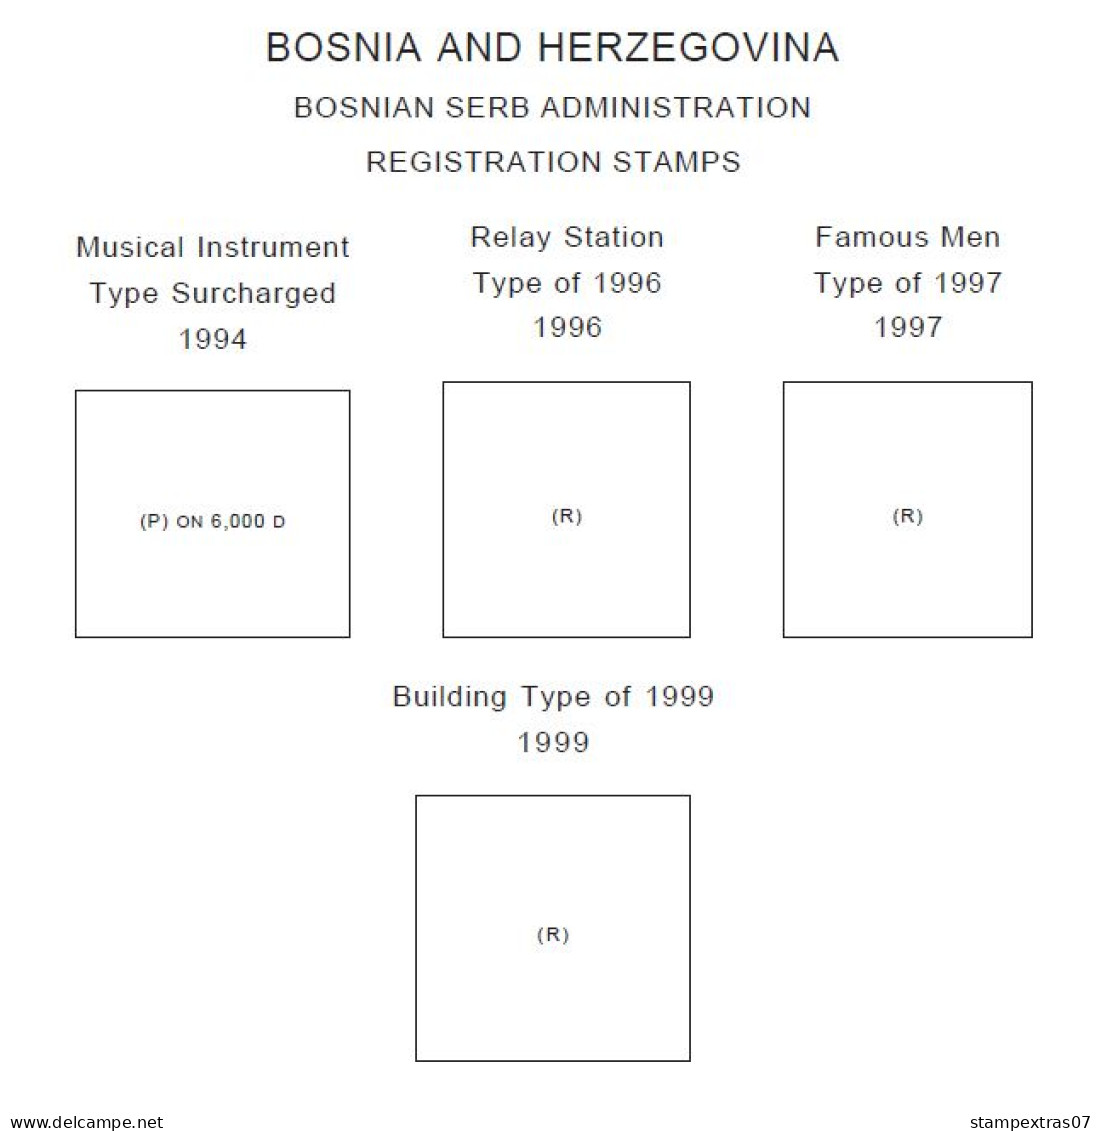 BOSNIA & HERZEGOVINA STAMP ALBUM PAGES 1879-2011 (218 Pages) - Inglese